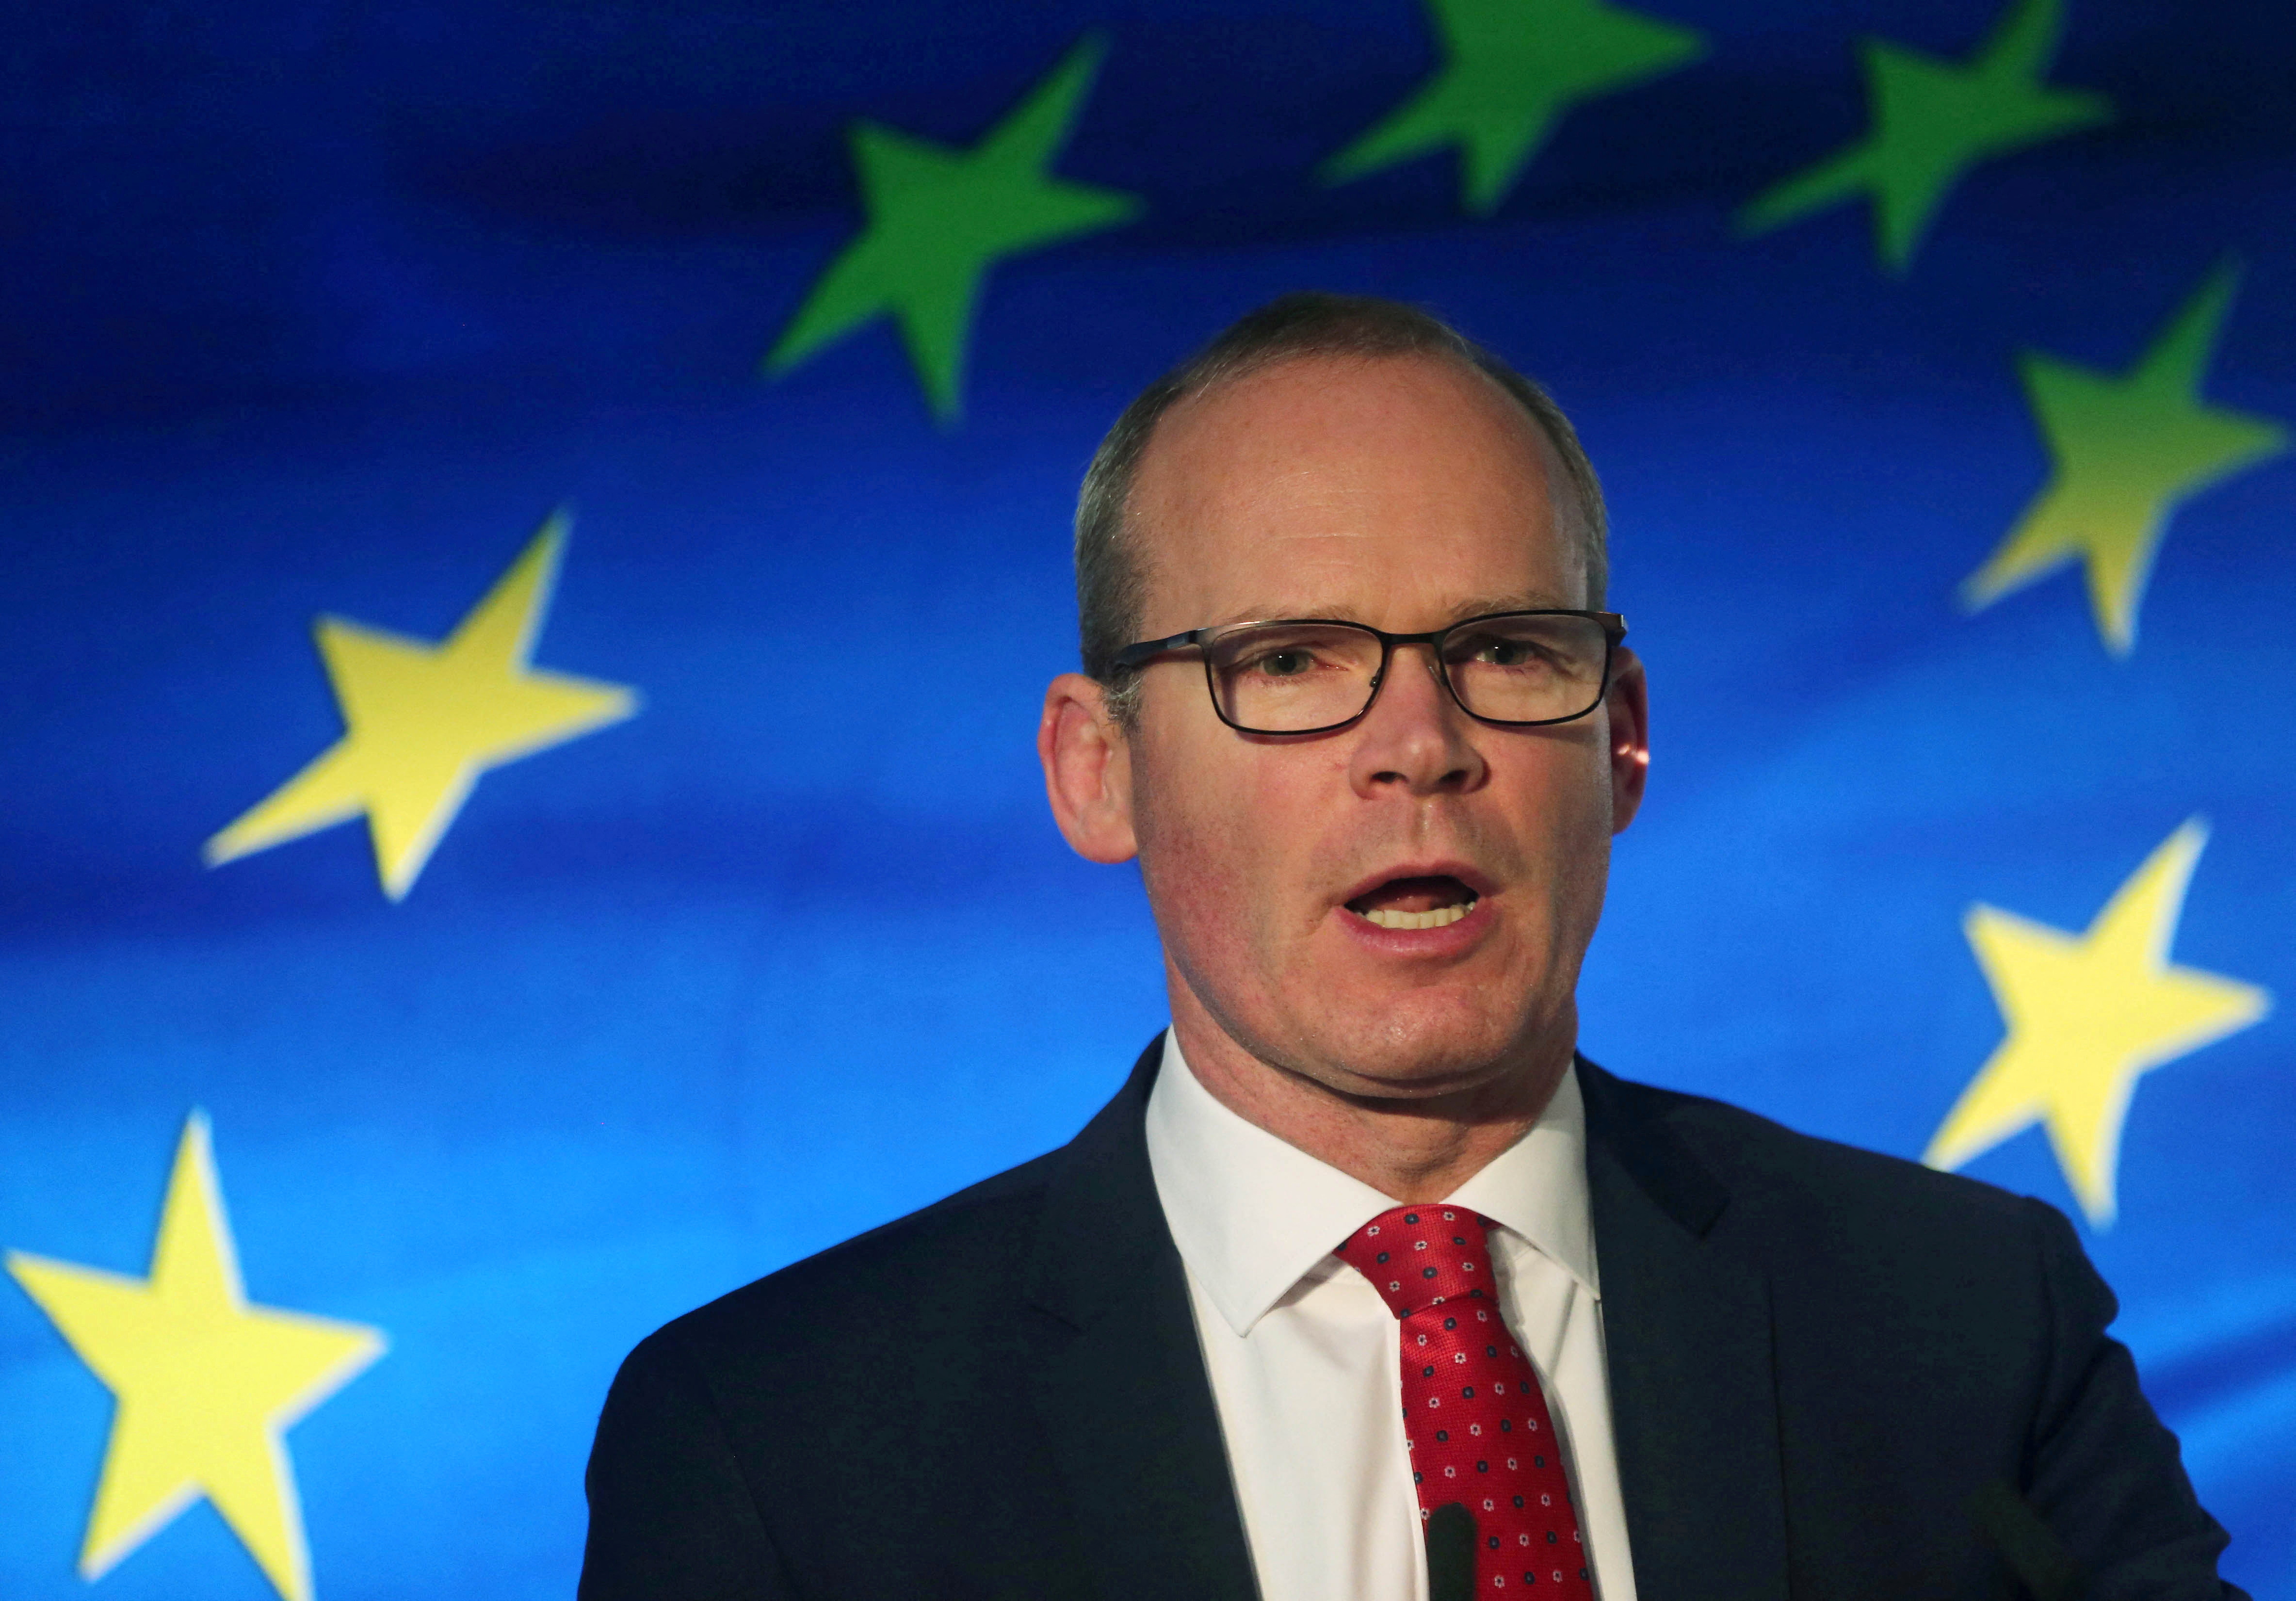 Irish Minister for Foreign Affairs Coveney speaks at the launch of his party's manifesto for the Irish General Election in Dublin